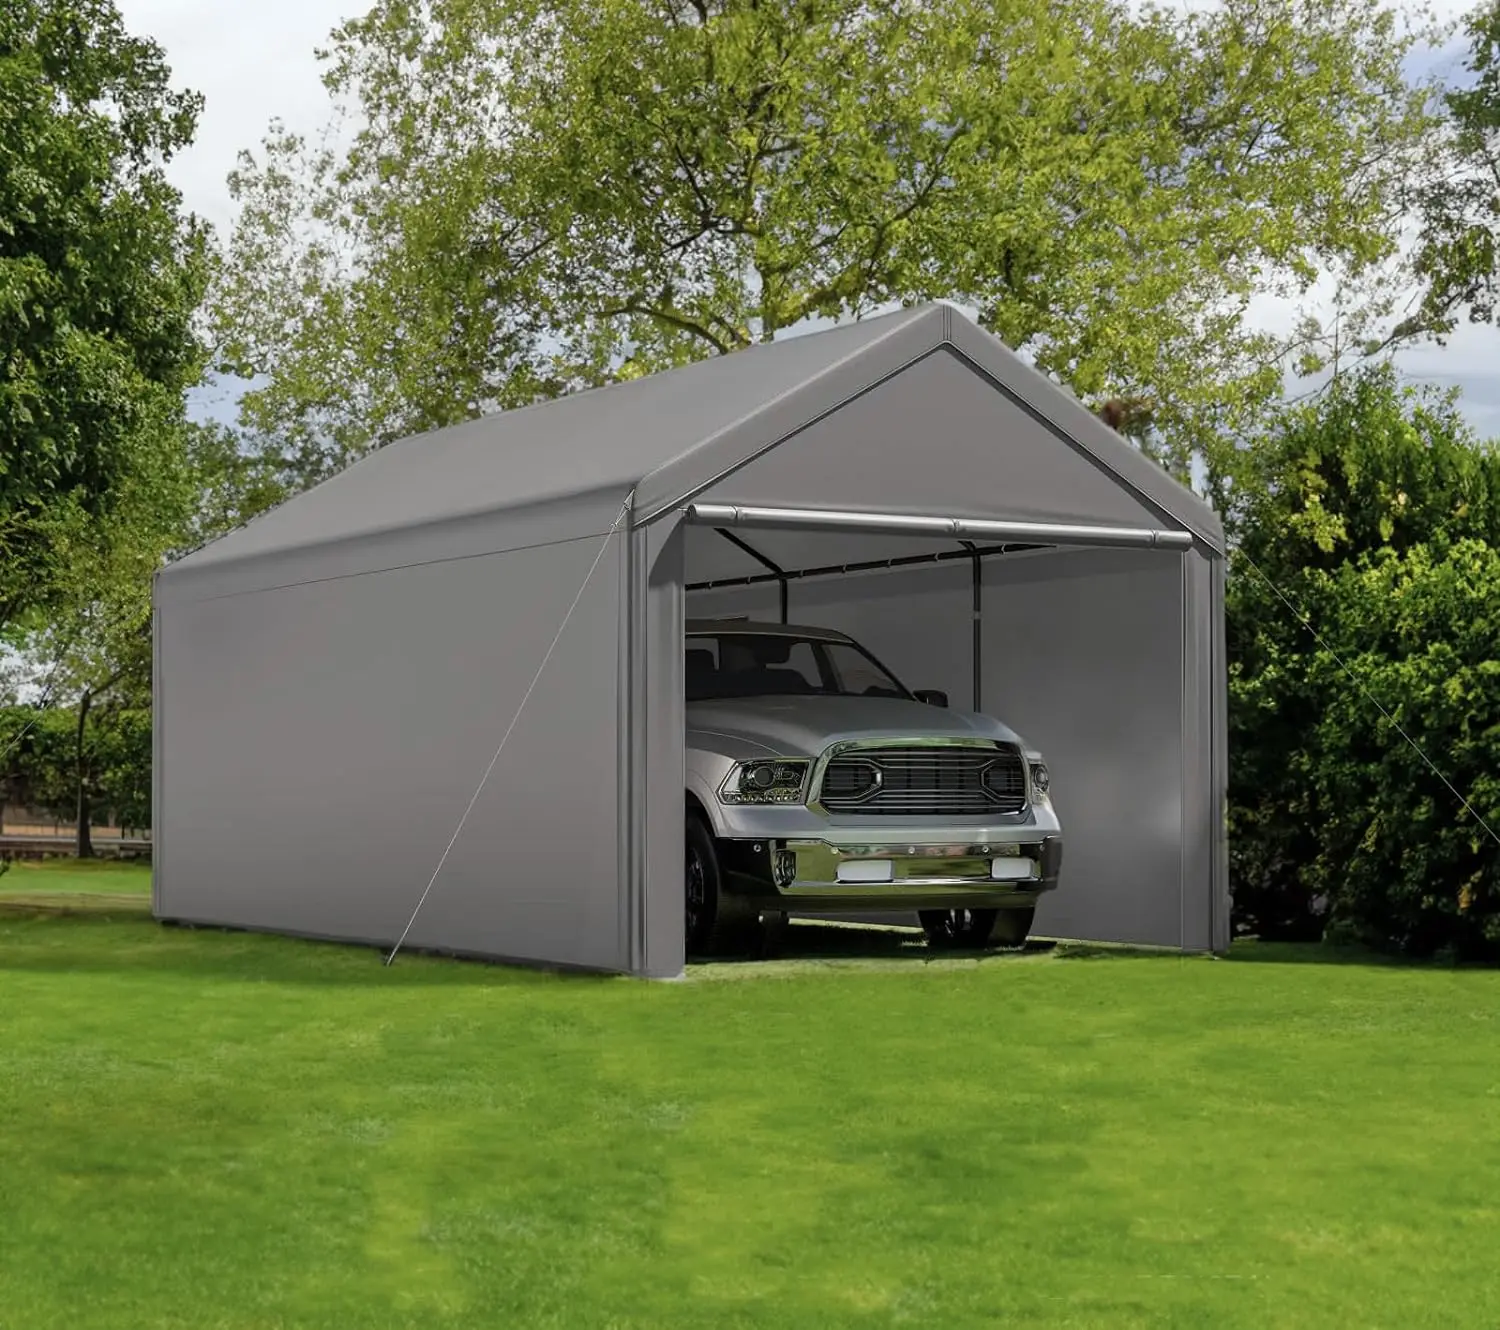 Outdoor Carport Heavy Duty Canopy Storage ShedPortable Garage Party TentPortable Garage with Removable Sidewalls & Doors